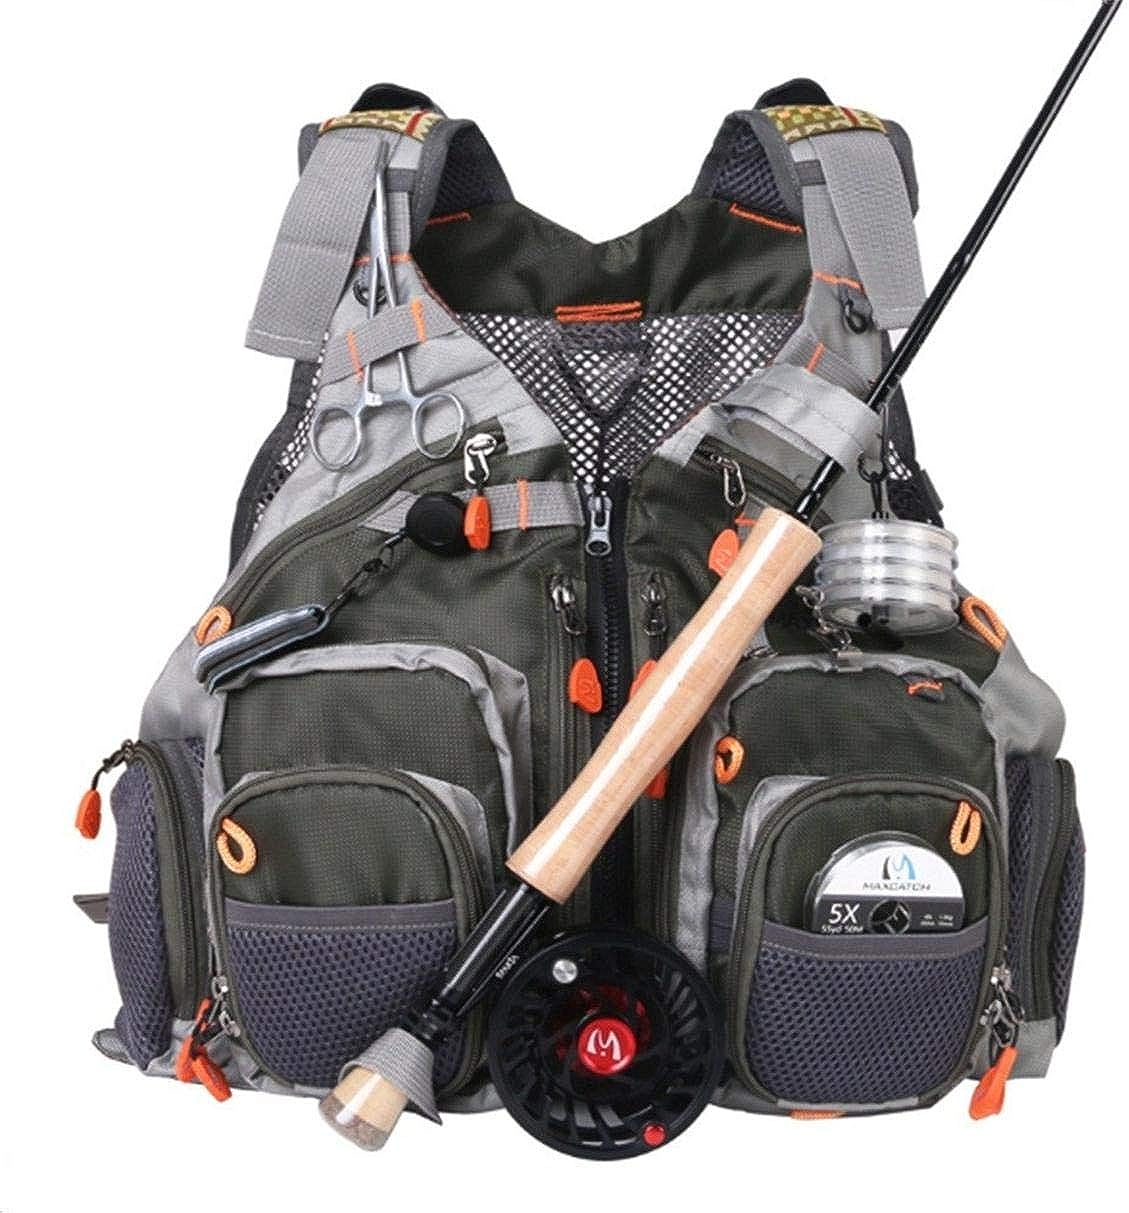 Fly Fishing Vest Pack for Men and Women Adjustable Outdoor Fishing